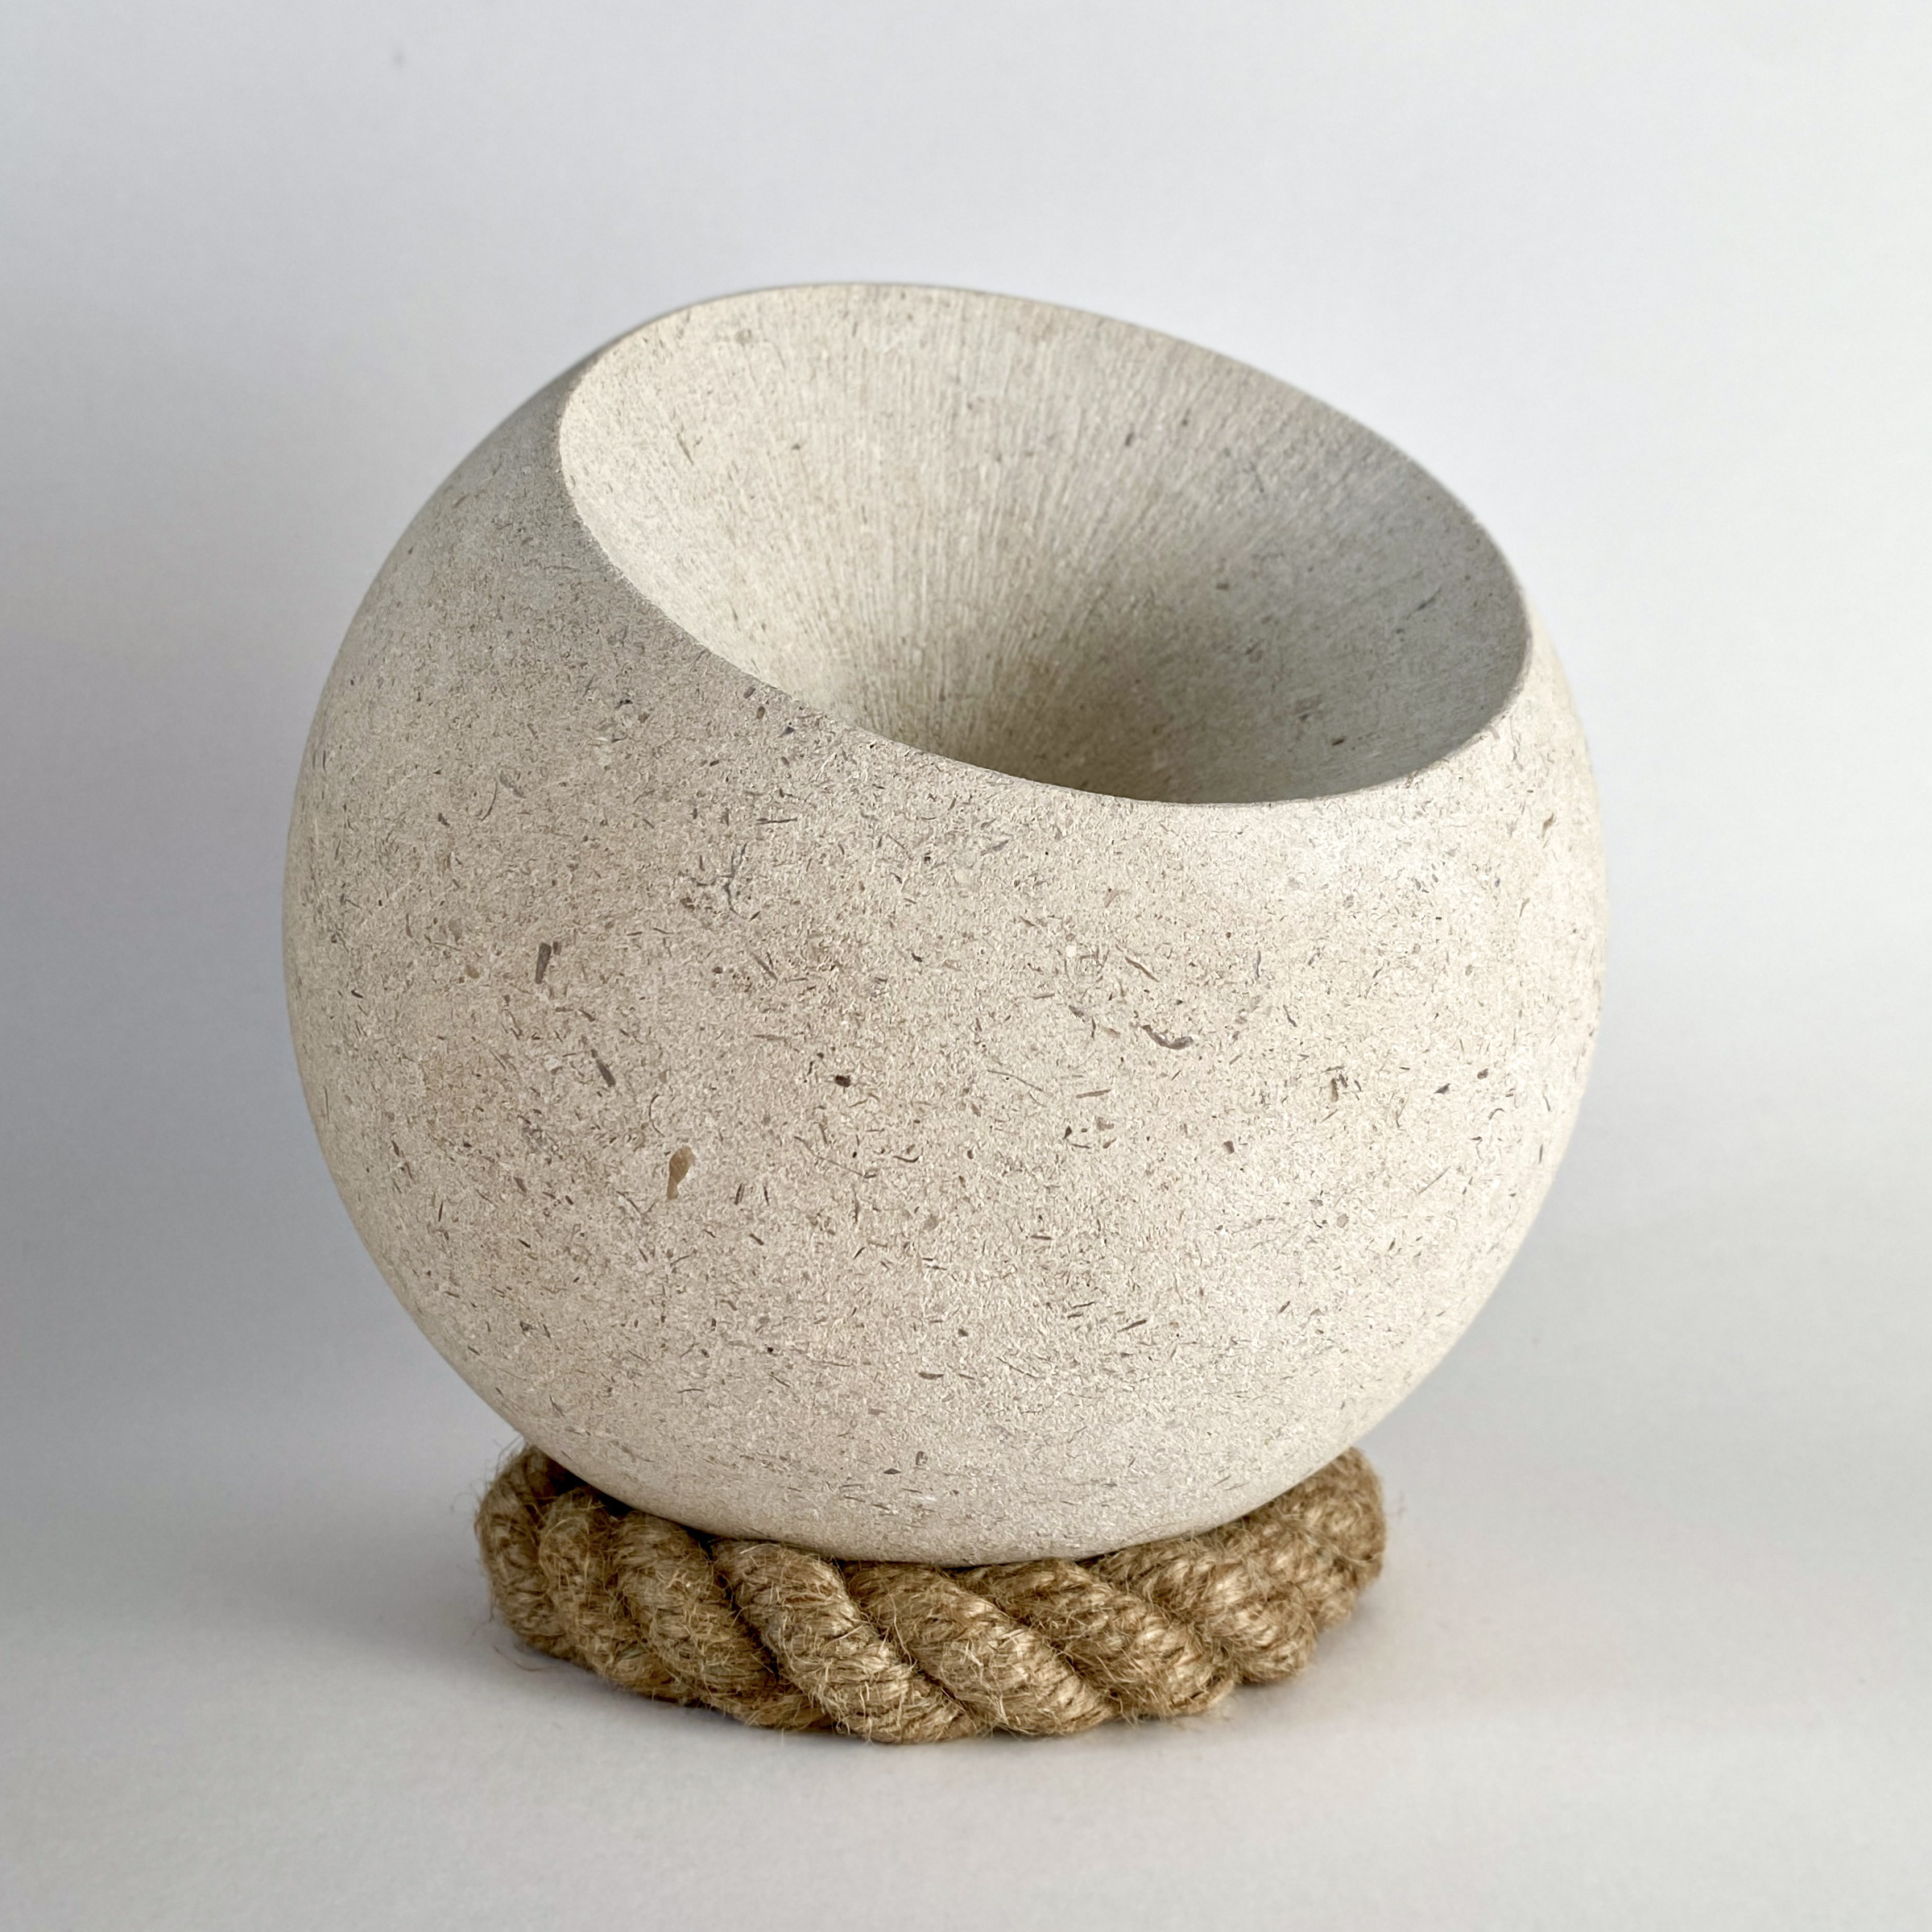 stone sphere with a cone shape carved out